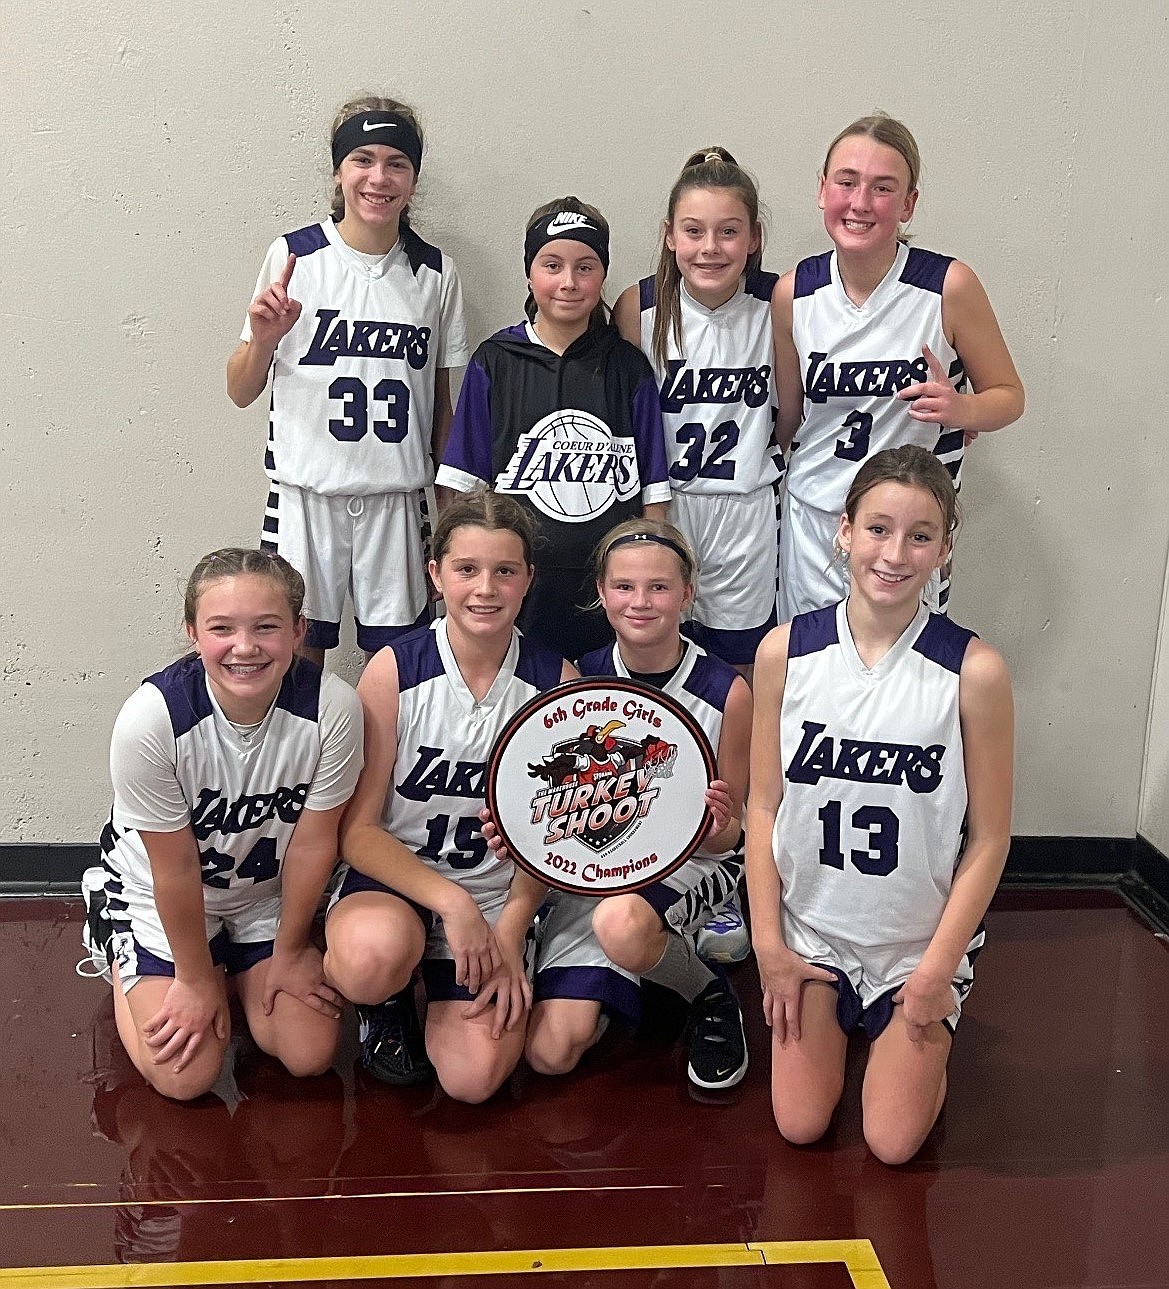 Courtesy photo
The Coeur d'Alene Lakers sixth grade girls AAU basketball team went 4-0 to win the 2022 Turkey Shoot Tournament at the Warehouse in Spokane. In the front row from left are Emmerson Cummings, Savannah Stevens, Brynlee Johnston and Noelia Axton; and back row from left, Allie Jenkin, Jaycee Bateman, Gretah Angle and Payton Brown.